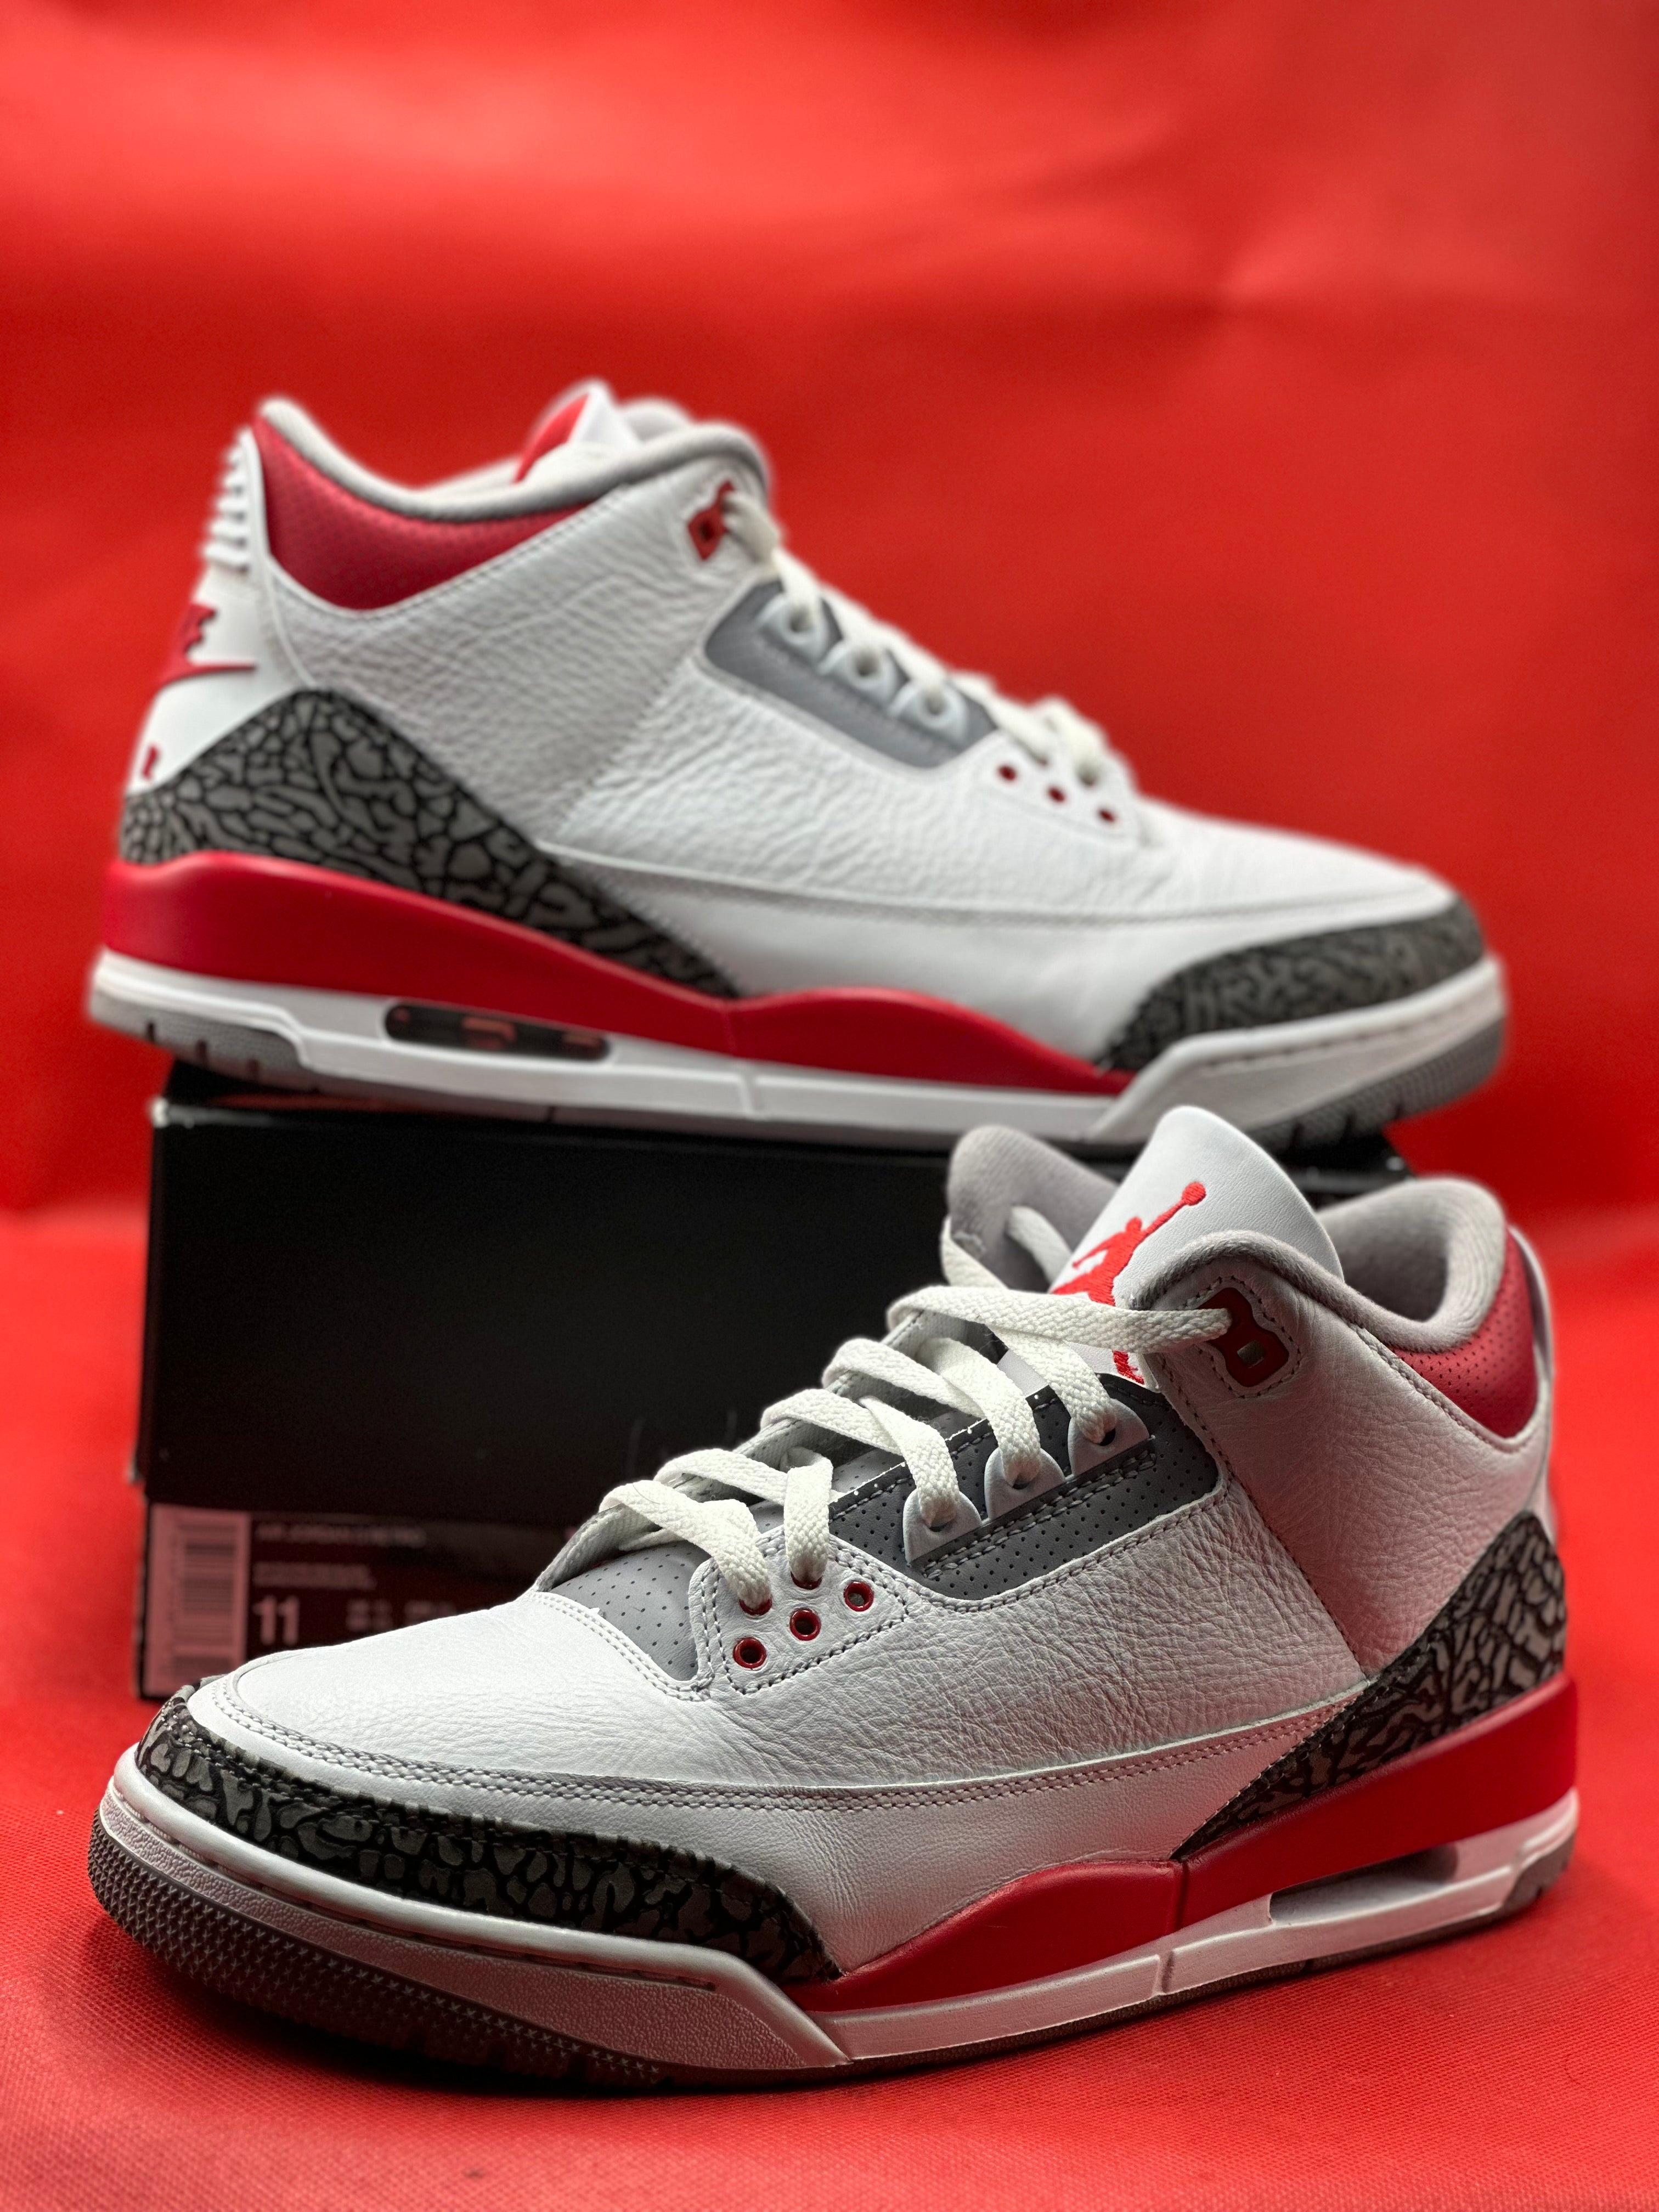 Fire Red 3s size 11